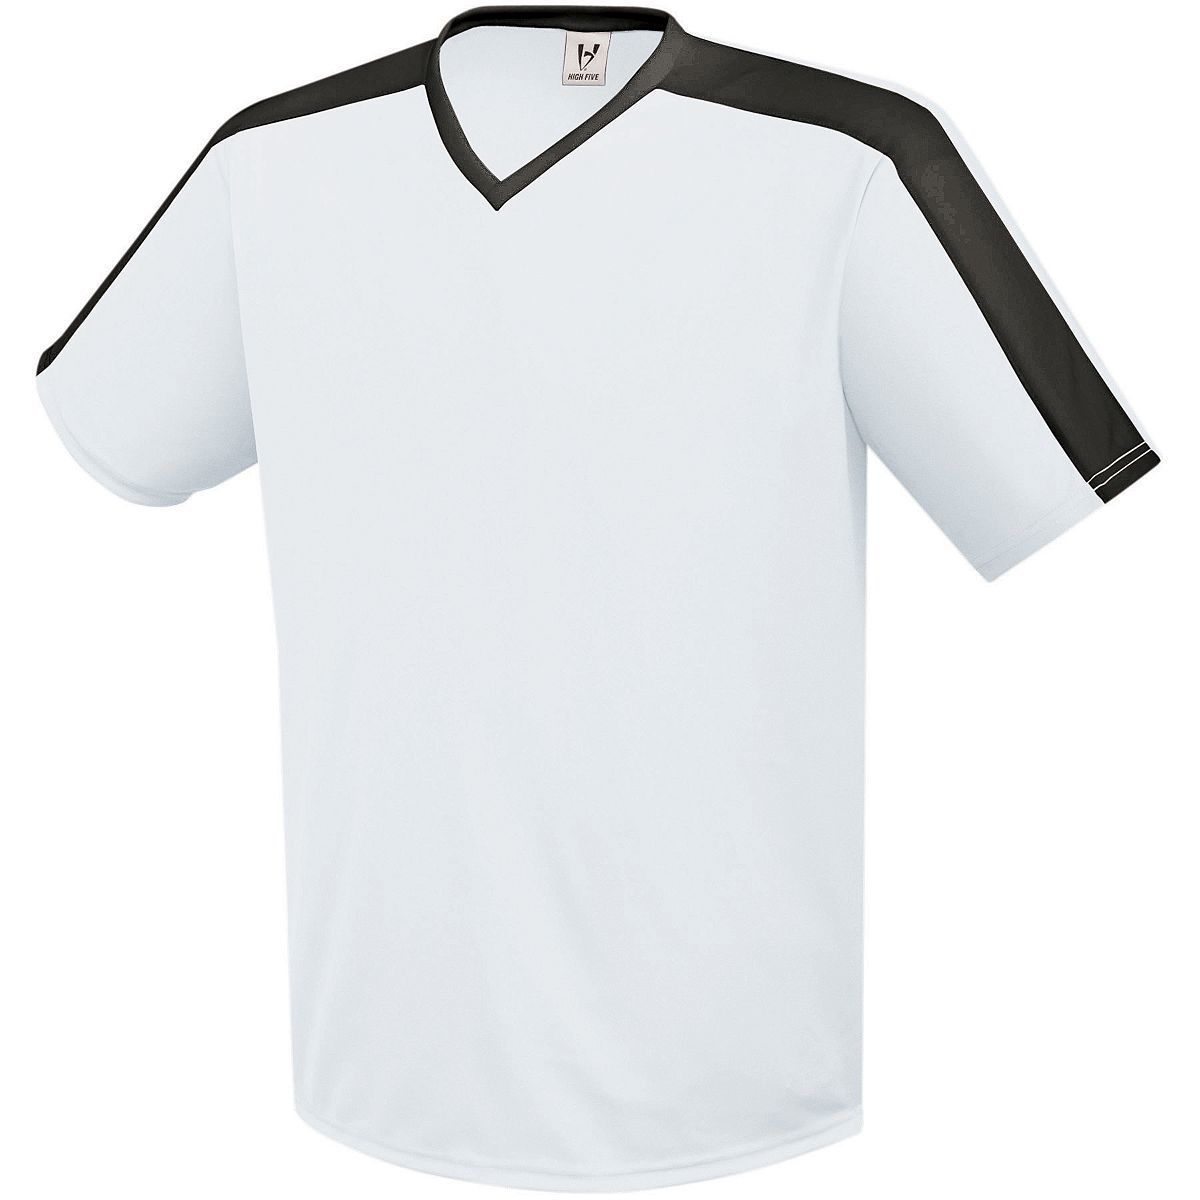 High 5 Youth Genesis Soccer Jersey in White/Black  -Part of the Youth, Youth-Jersey, High5-Products, Soccer, Shirts, All-Sports-1 product lines at KanaleyCreations.com